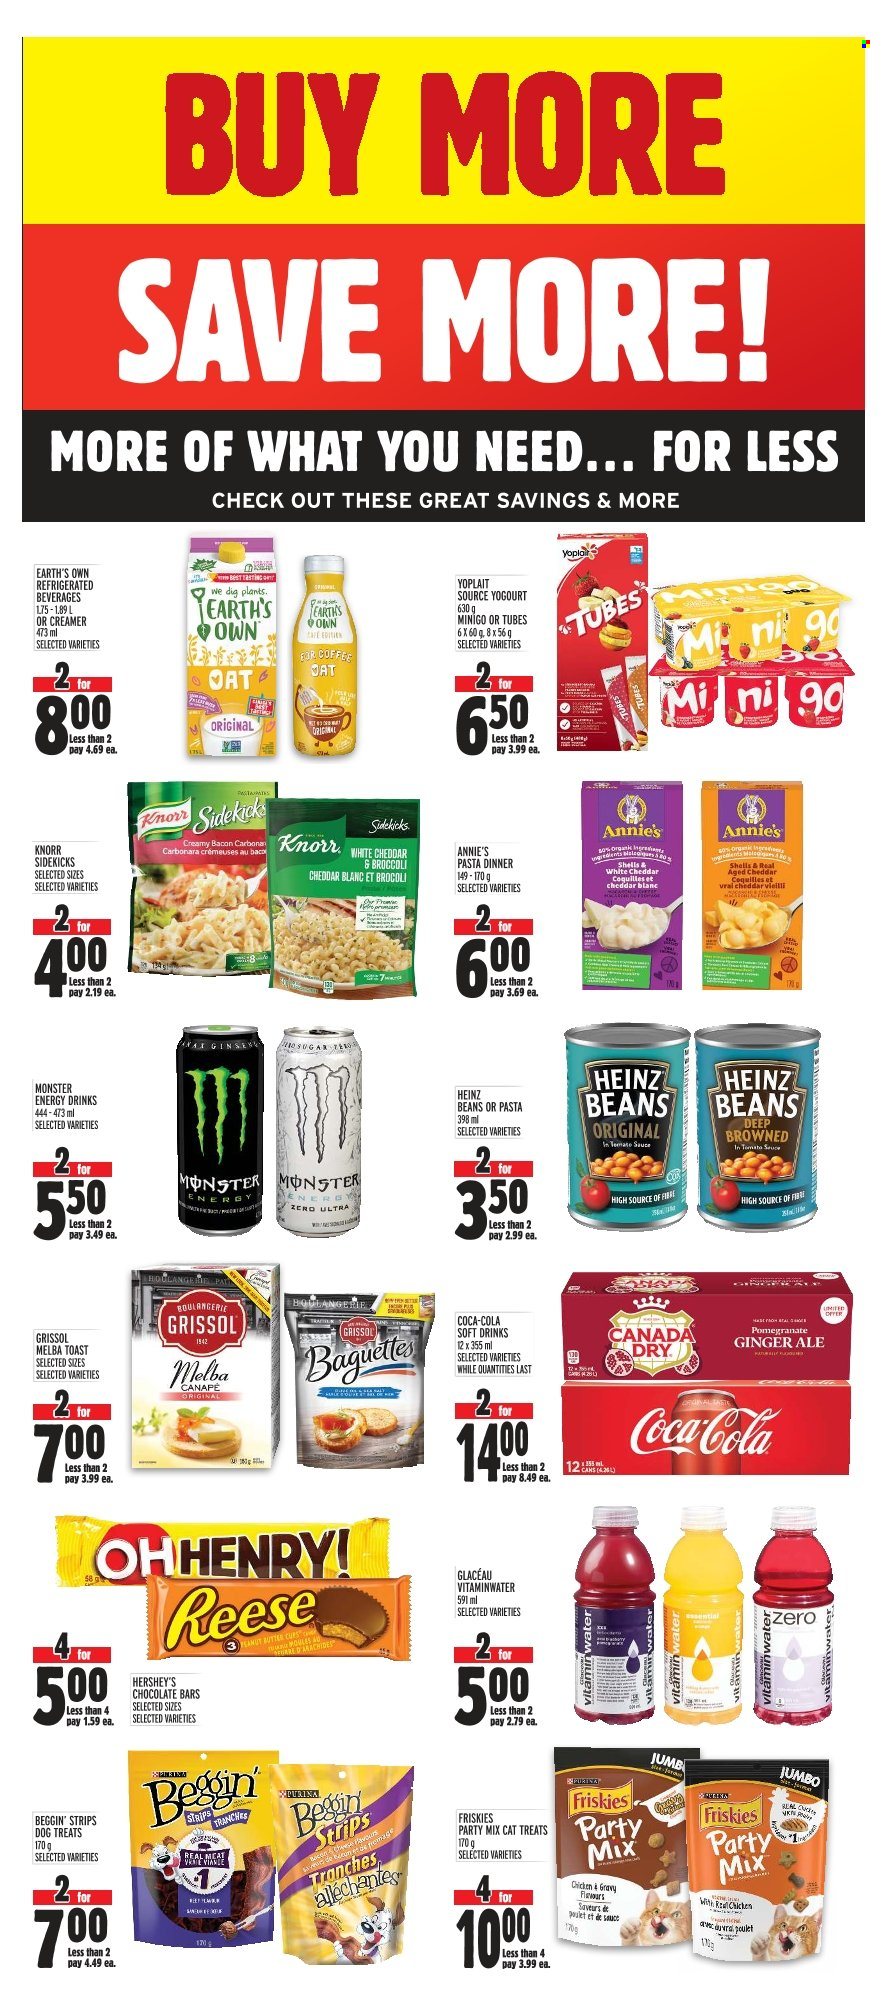 thumbnail - Metro Flyer - February 02, 2023 - February 08, 2023 - Sales products - broccoli, pomegranate, sauce, Annie's, bacon, Yoplait, creamer, Hershey's, strips, chocolate bar, sugar, oats, Canada Dry, Coca-Cola, ginger ale, energy drink, Monster, soft drink, Monster Energy, Carbona, Purina, Beggin', Friskies, baguette, Heinz, Knorr. Page 11.